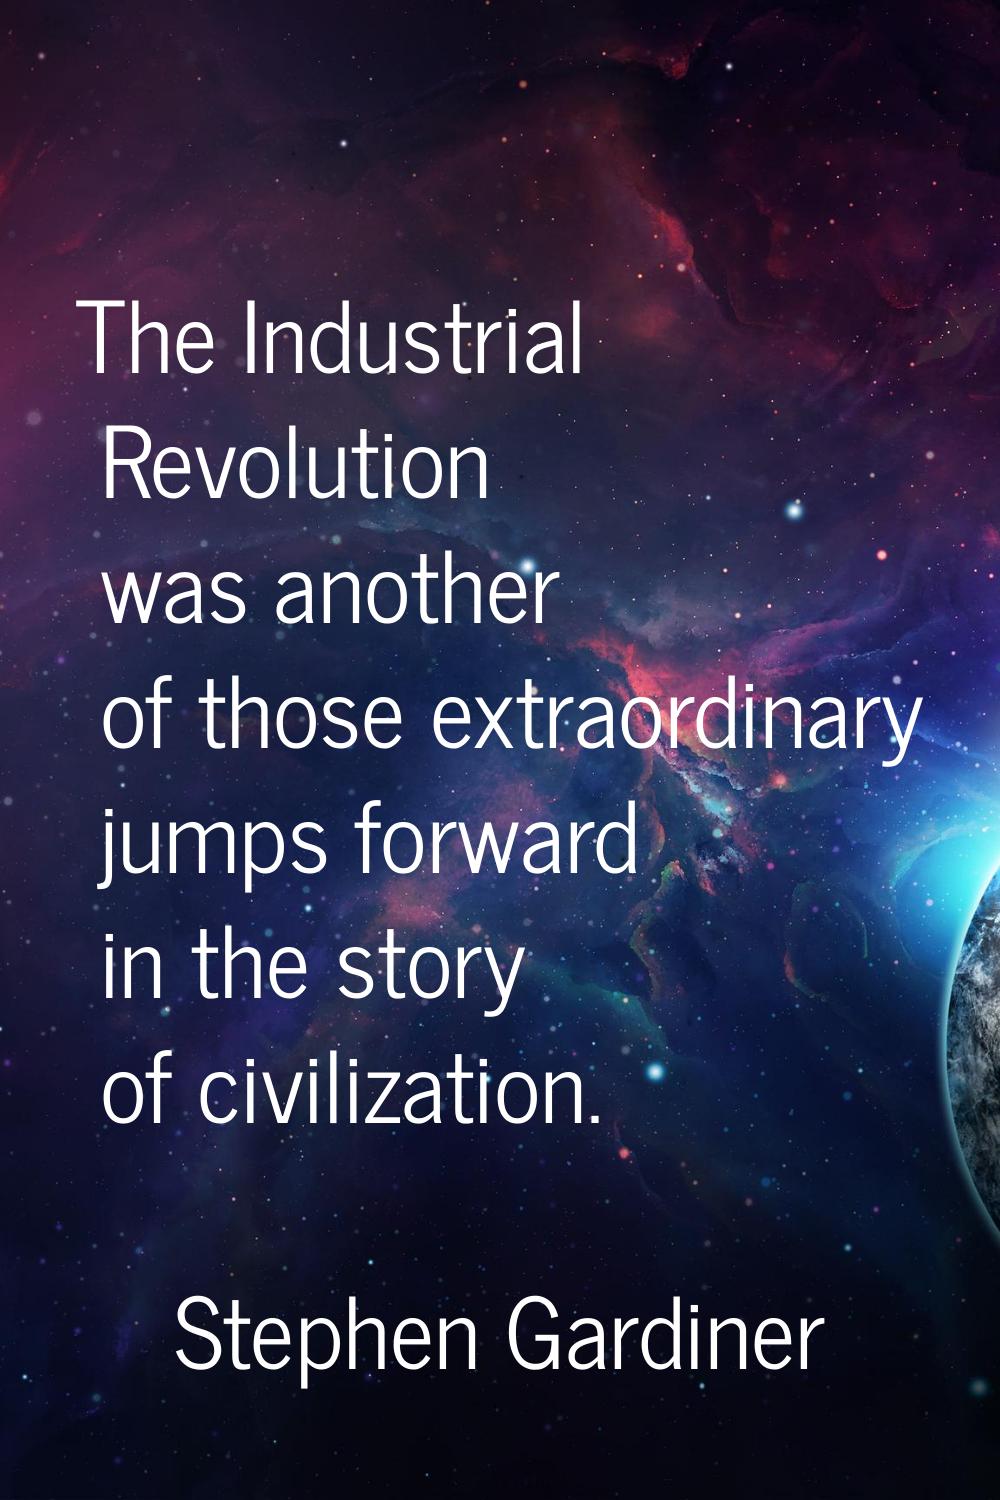 The Industrial Revolution was another of those extraordinary jumps forward in the story of civiliza